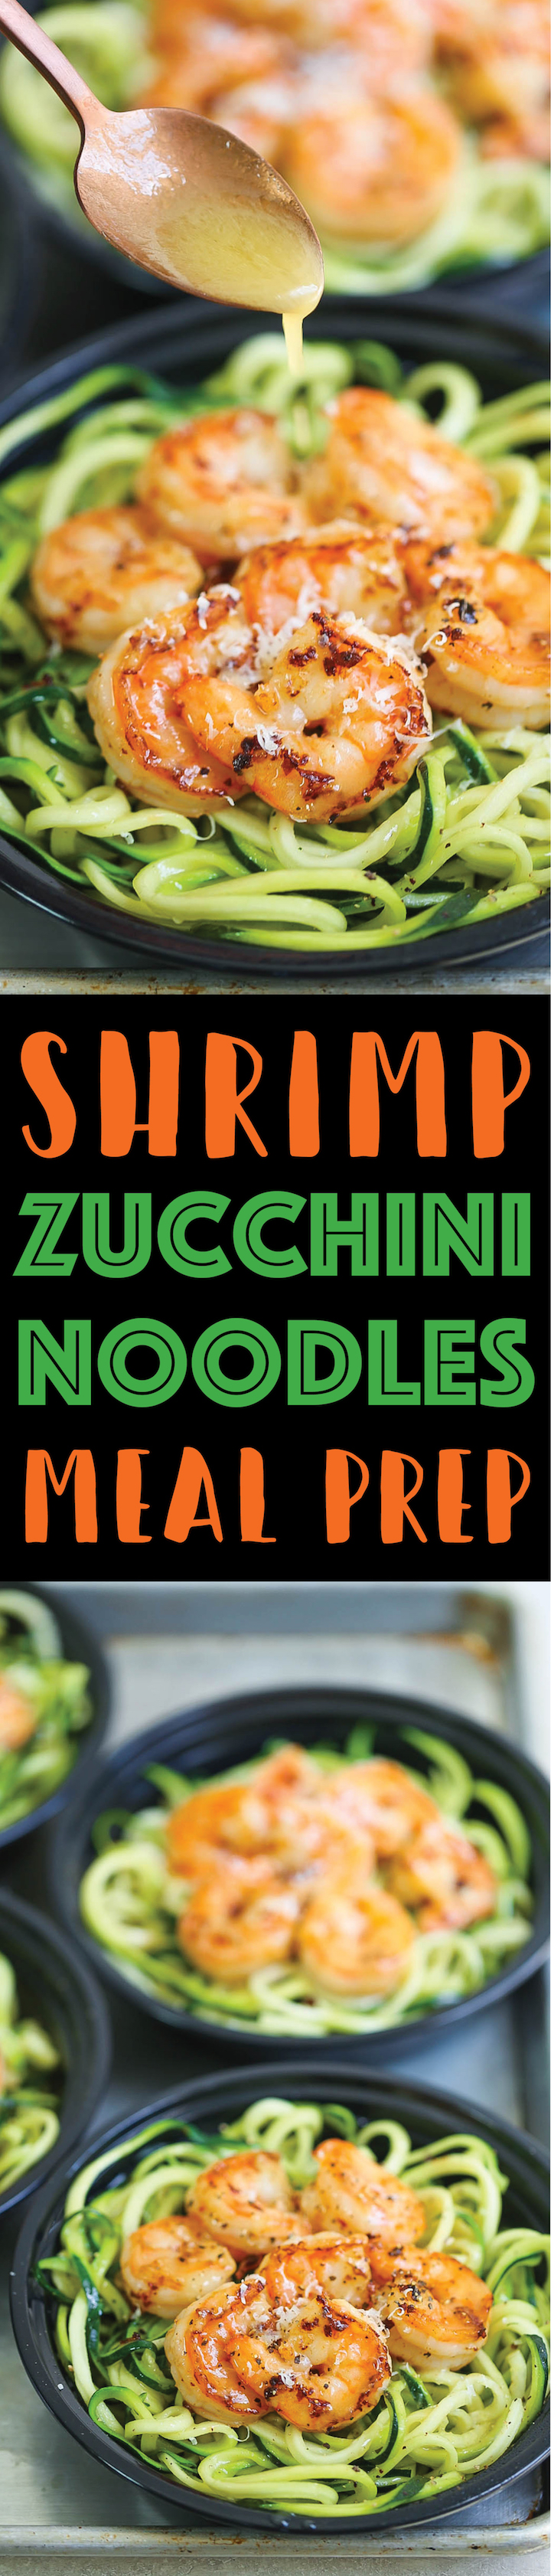 Shrimp Zucchini Noodles Meal Prep - Craving shrimp scampi? Prep for the week ahead for a low-carb, quick, easy and HEALTHY meal using zucchini noodles!